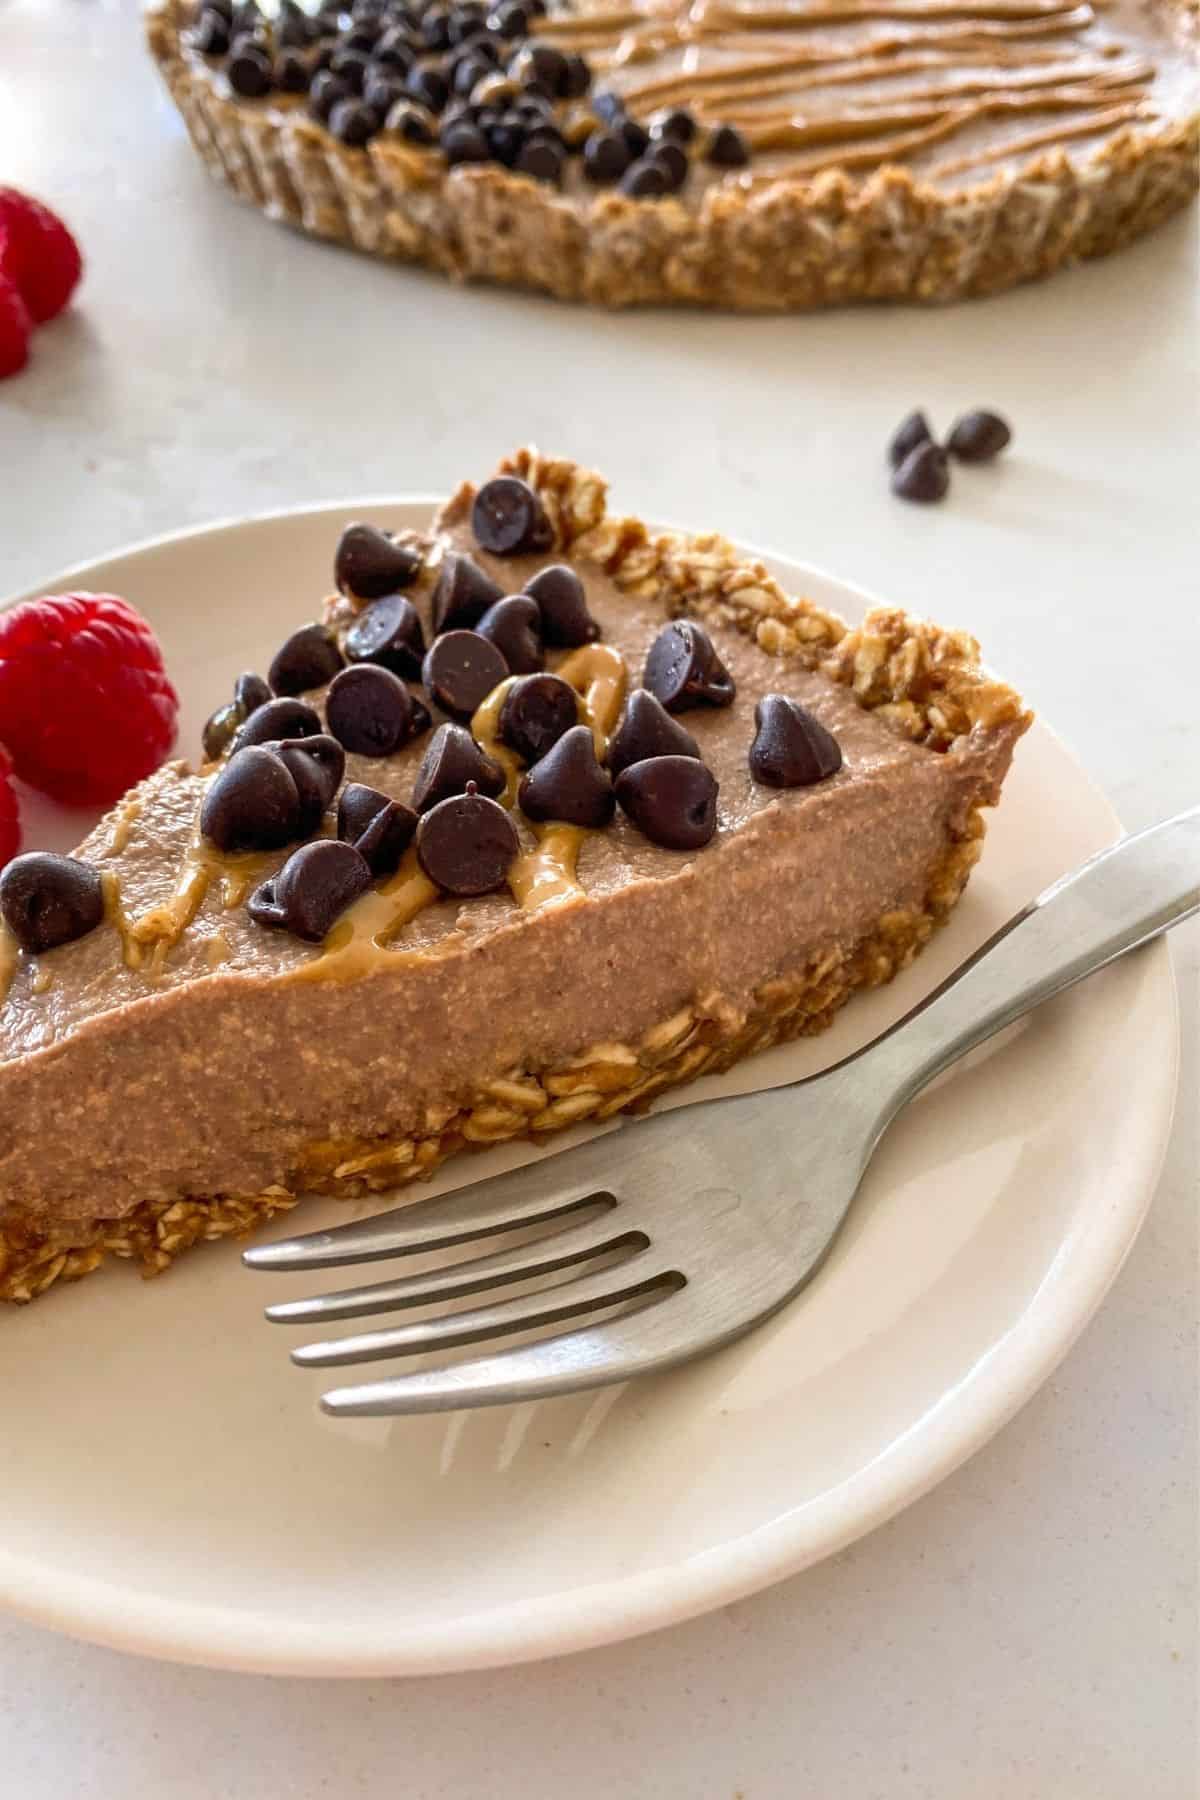 Slice of peanut butter pie in plate with fork and chocolate chips on top with raspberries on the side.